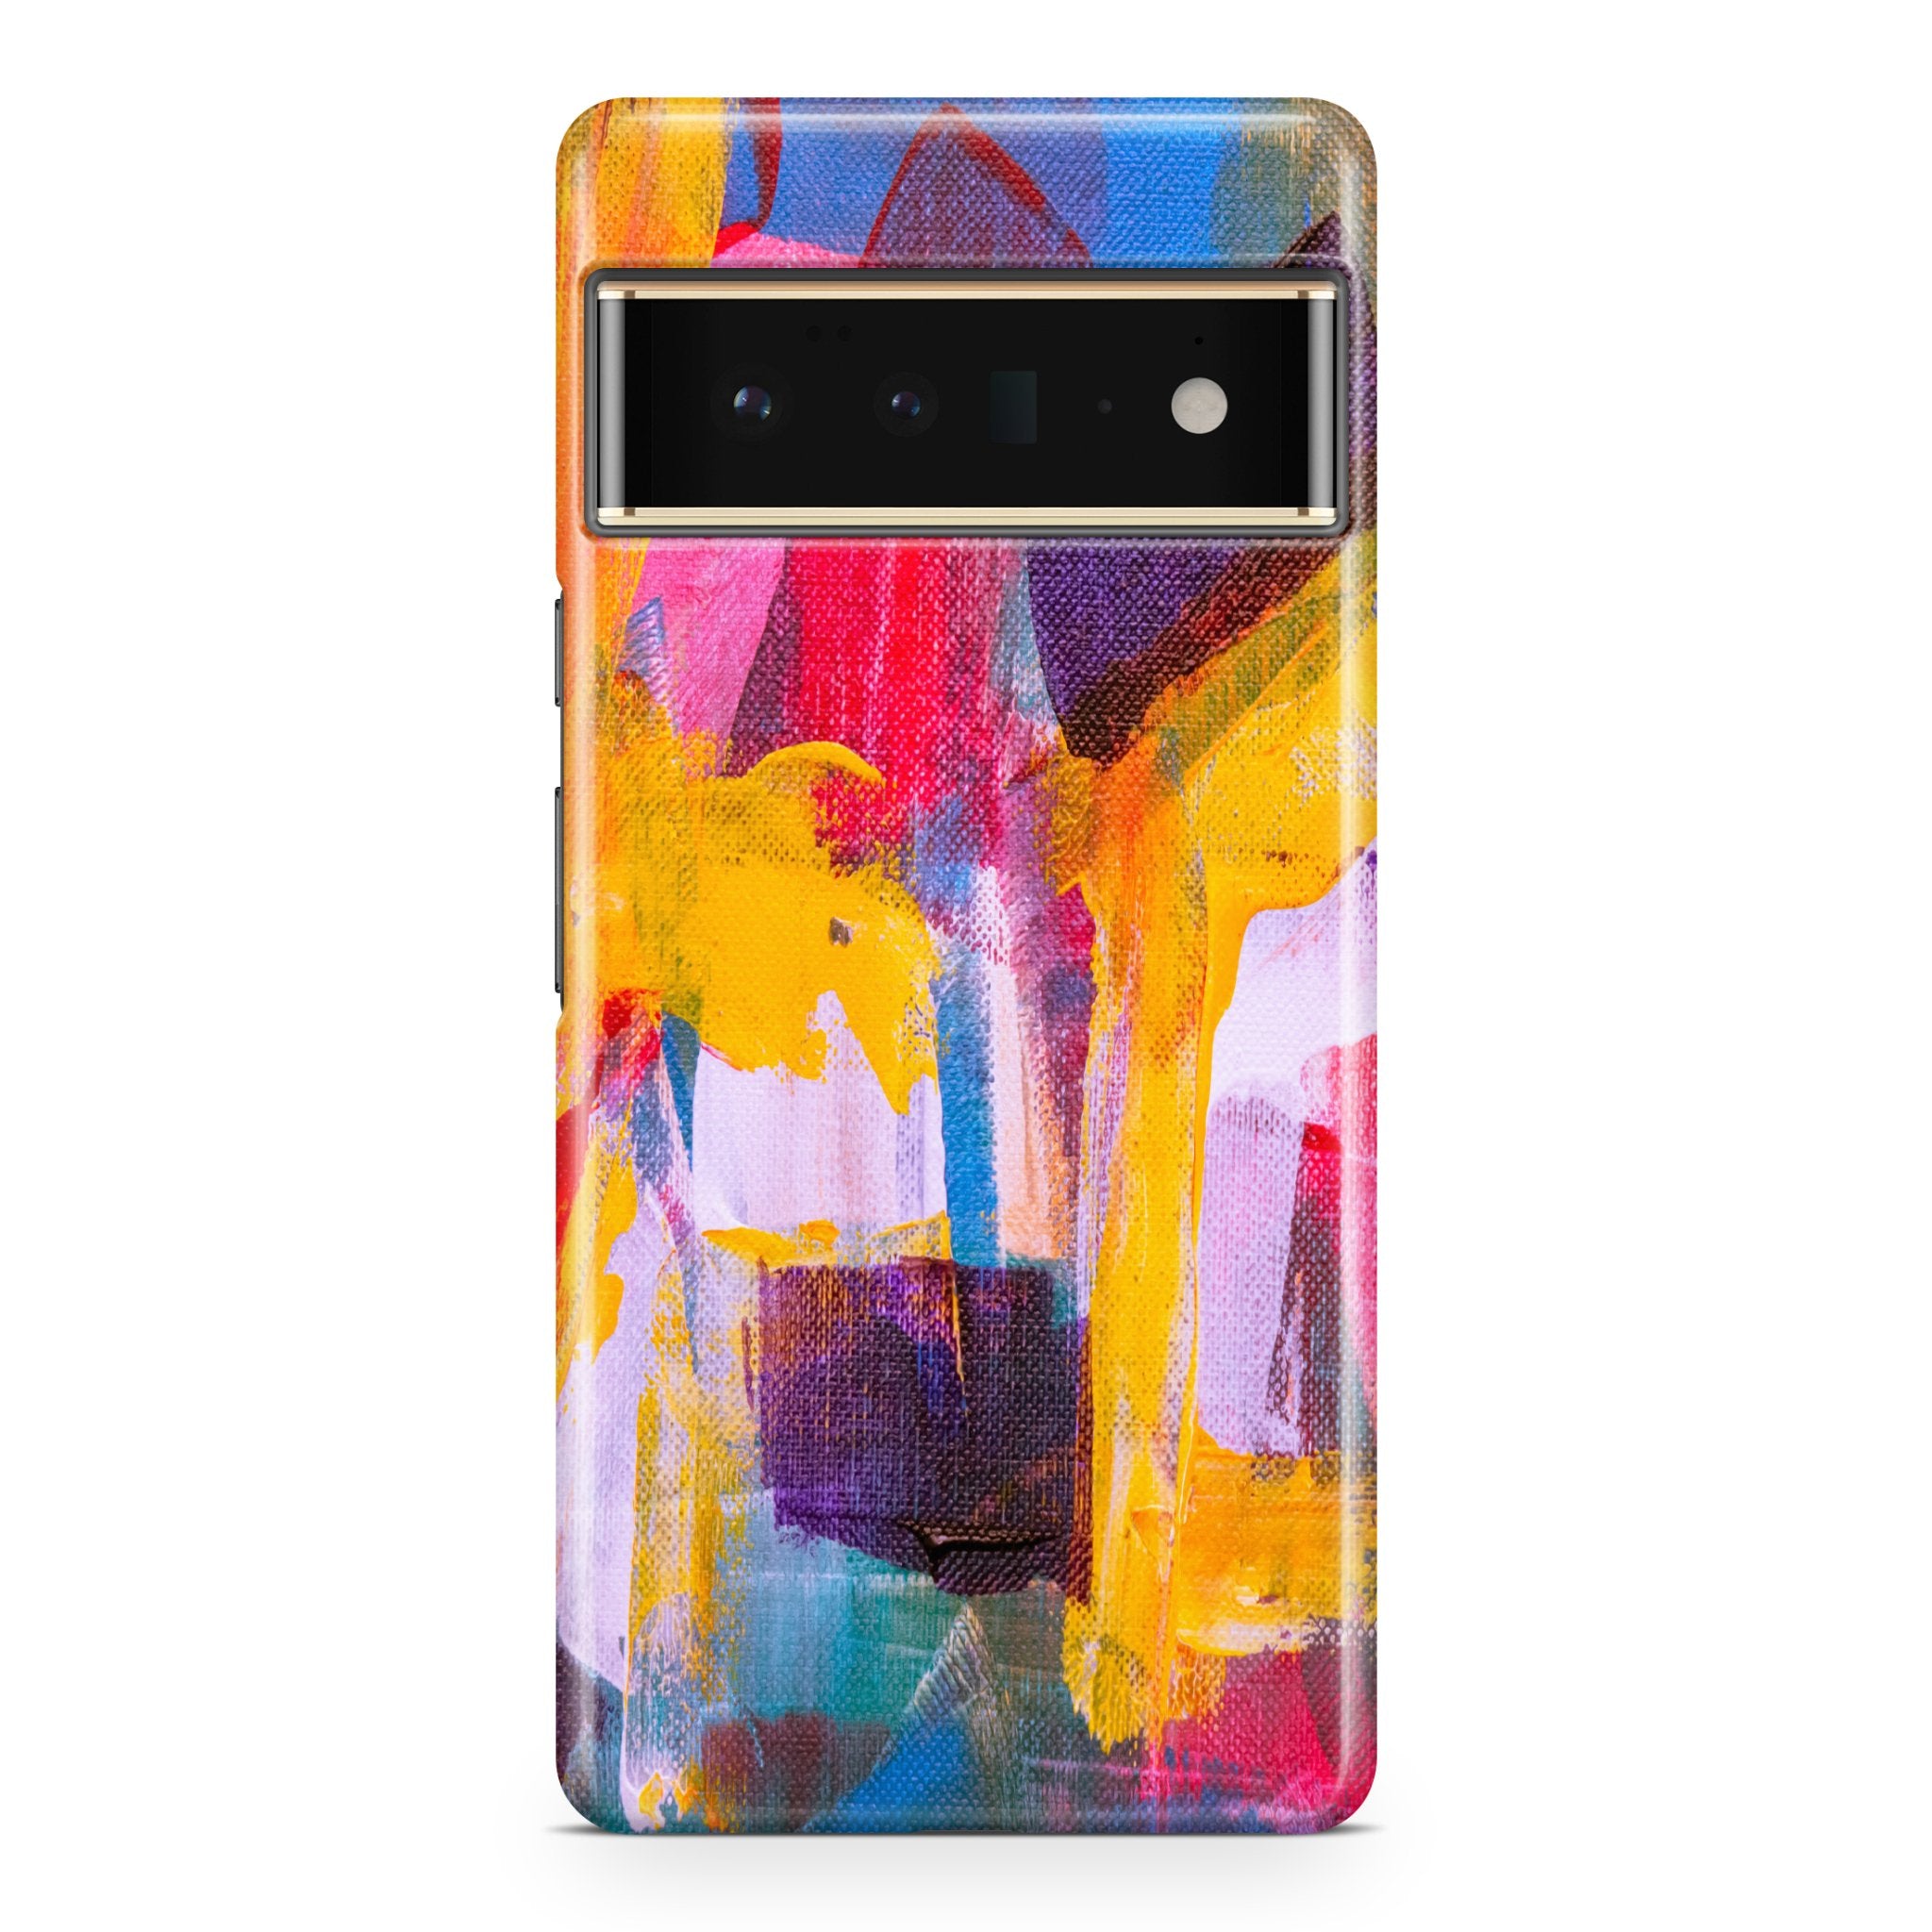 Canvas Chaos - Google phone case designs by CaseSwagger